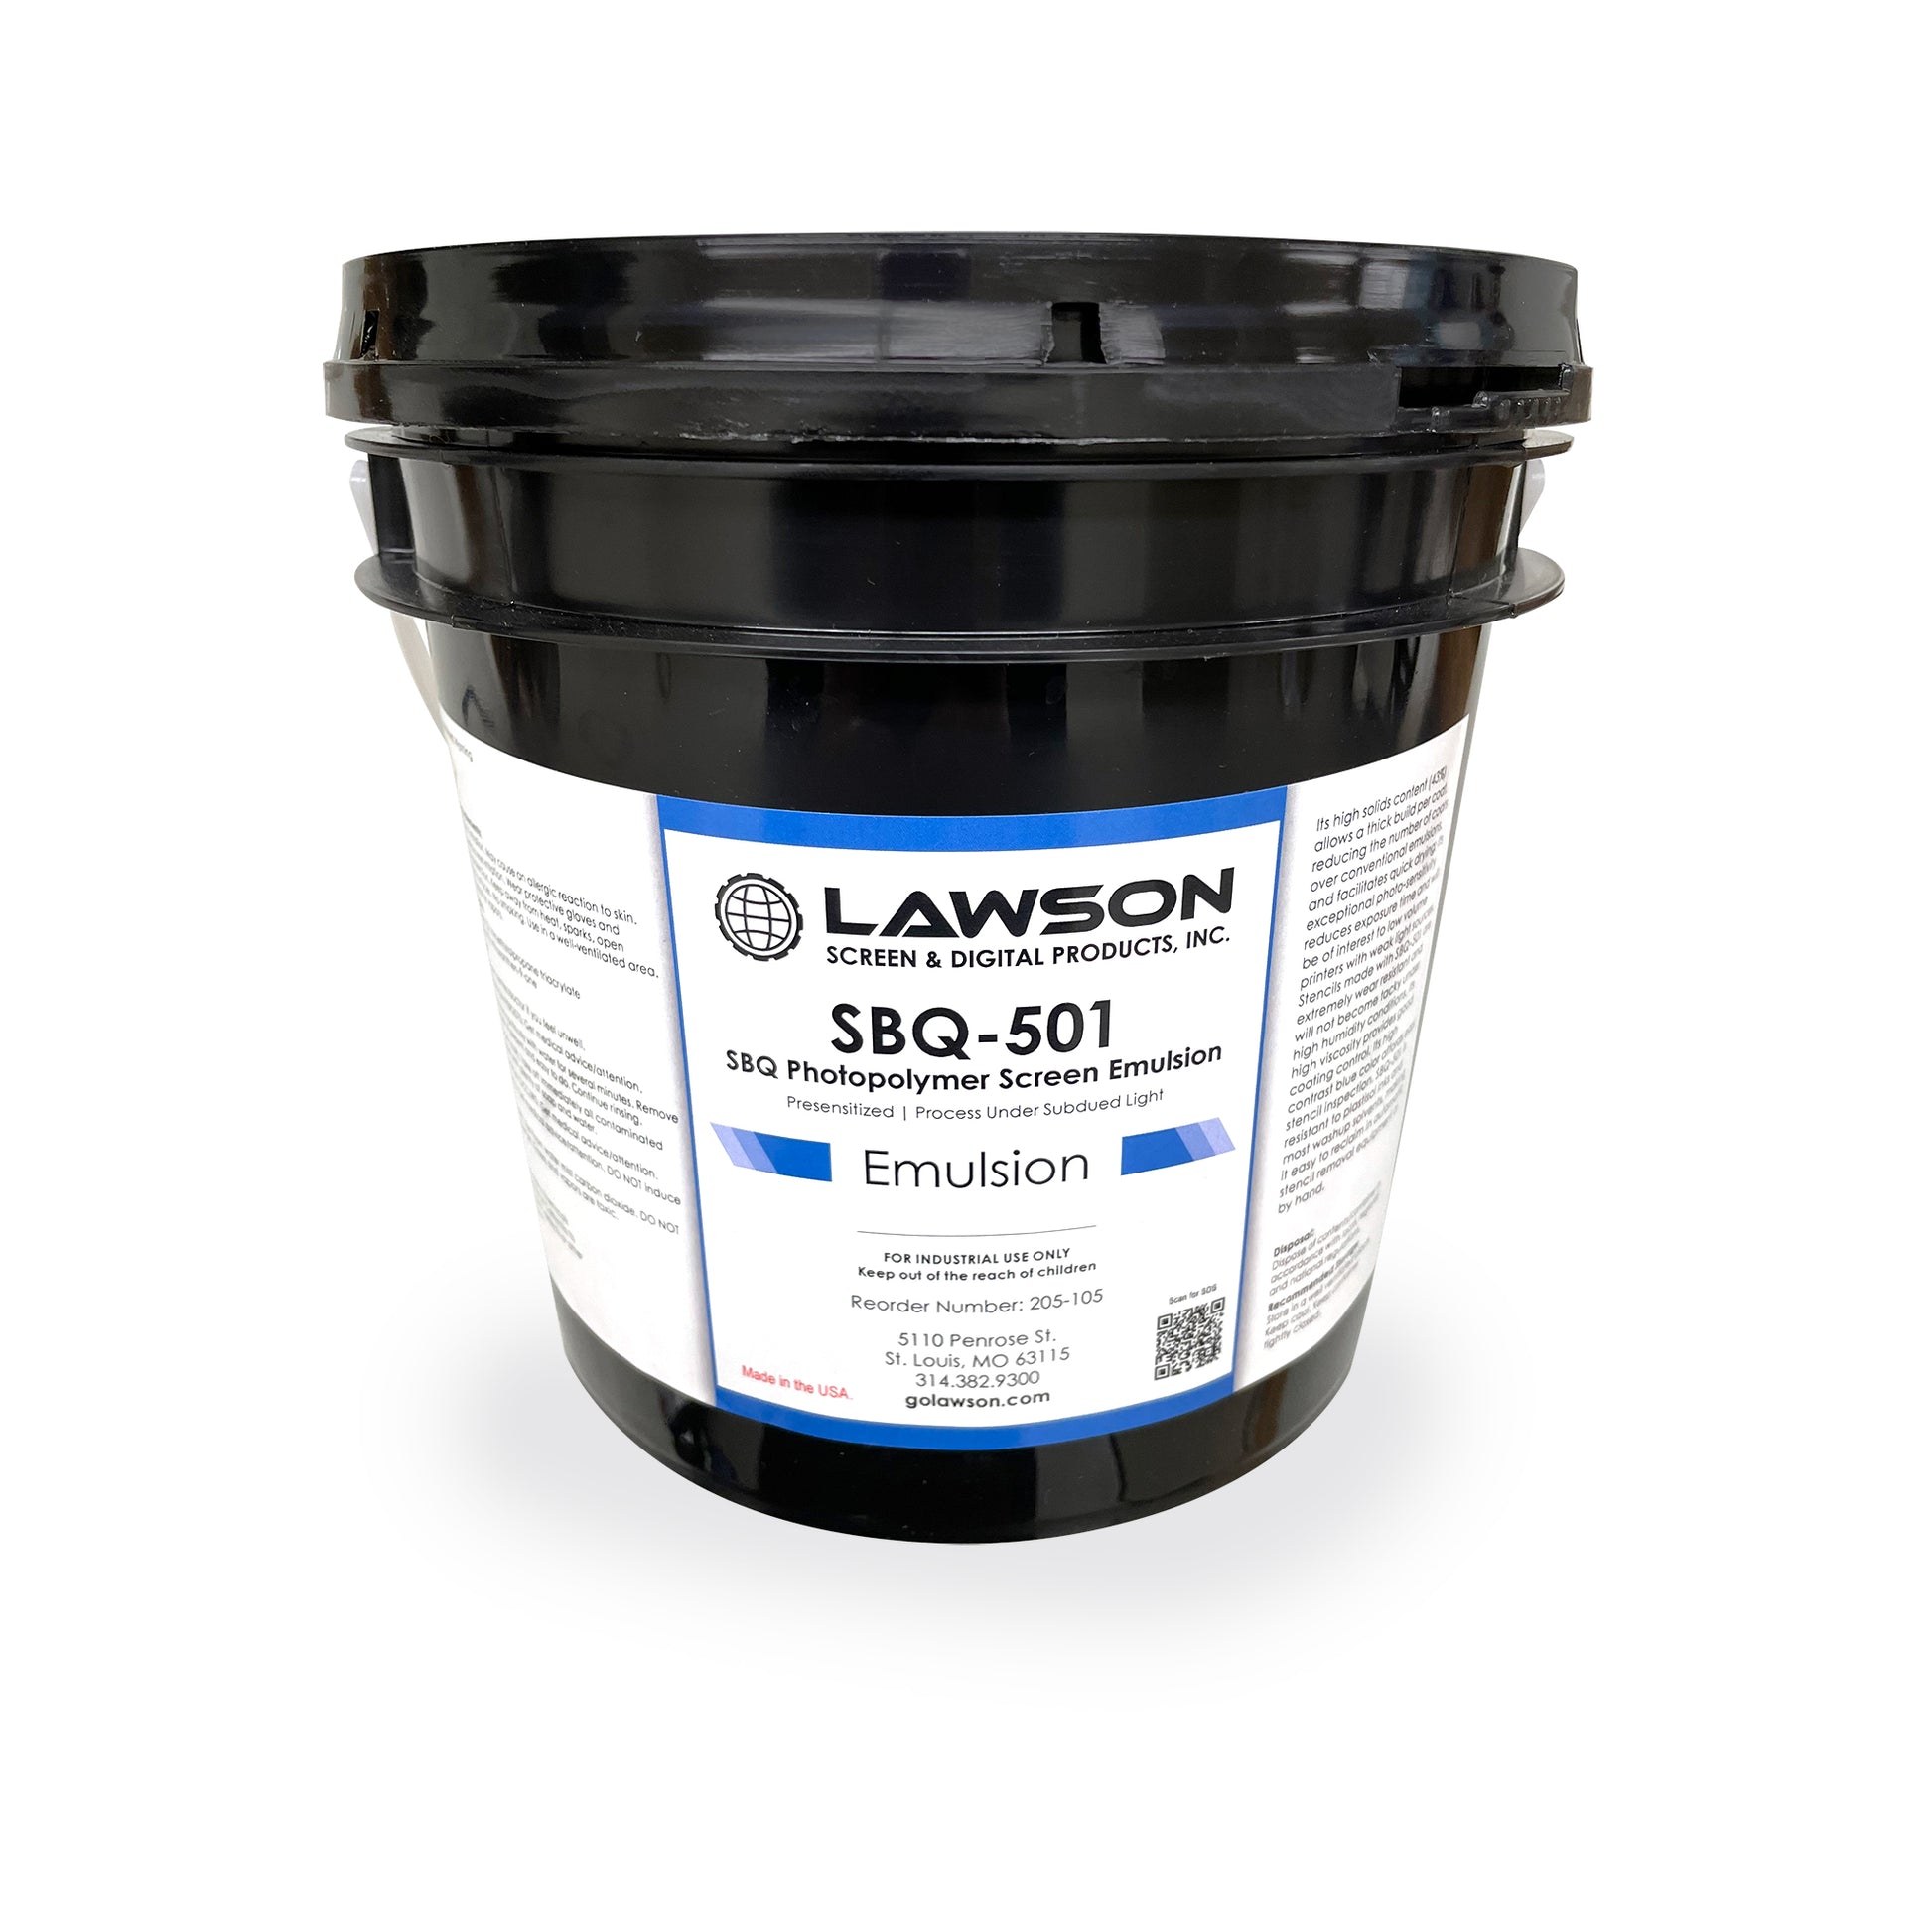 BEST PRACTICES FOR COATING SCREEN PRINTING SCREENS WITH EMULSION – baselayr